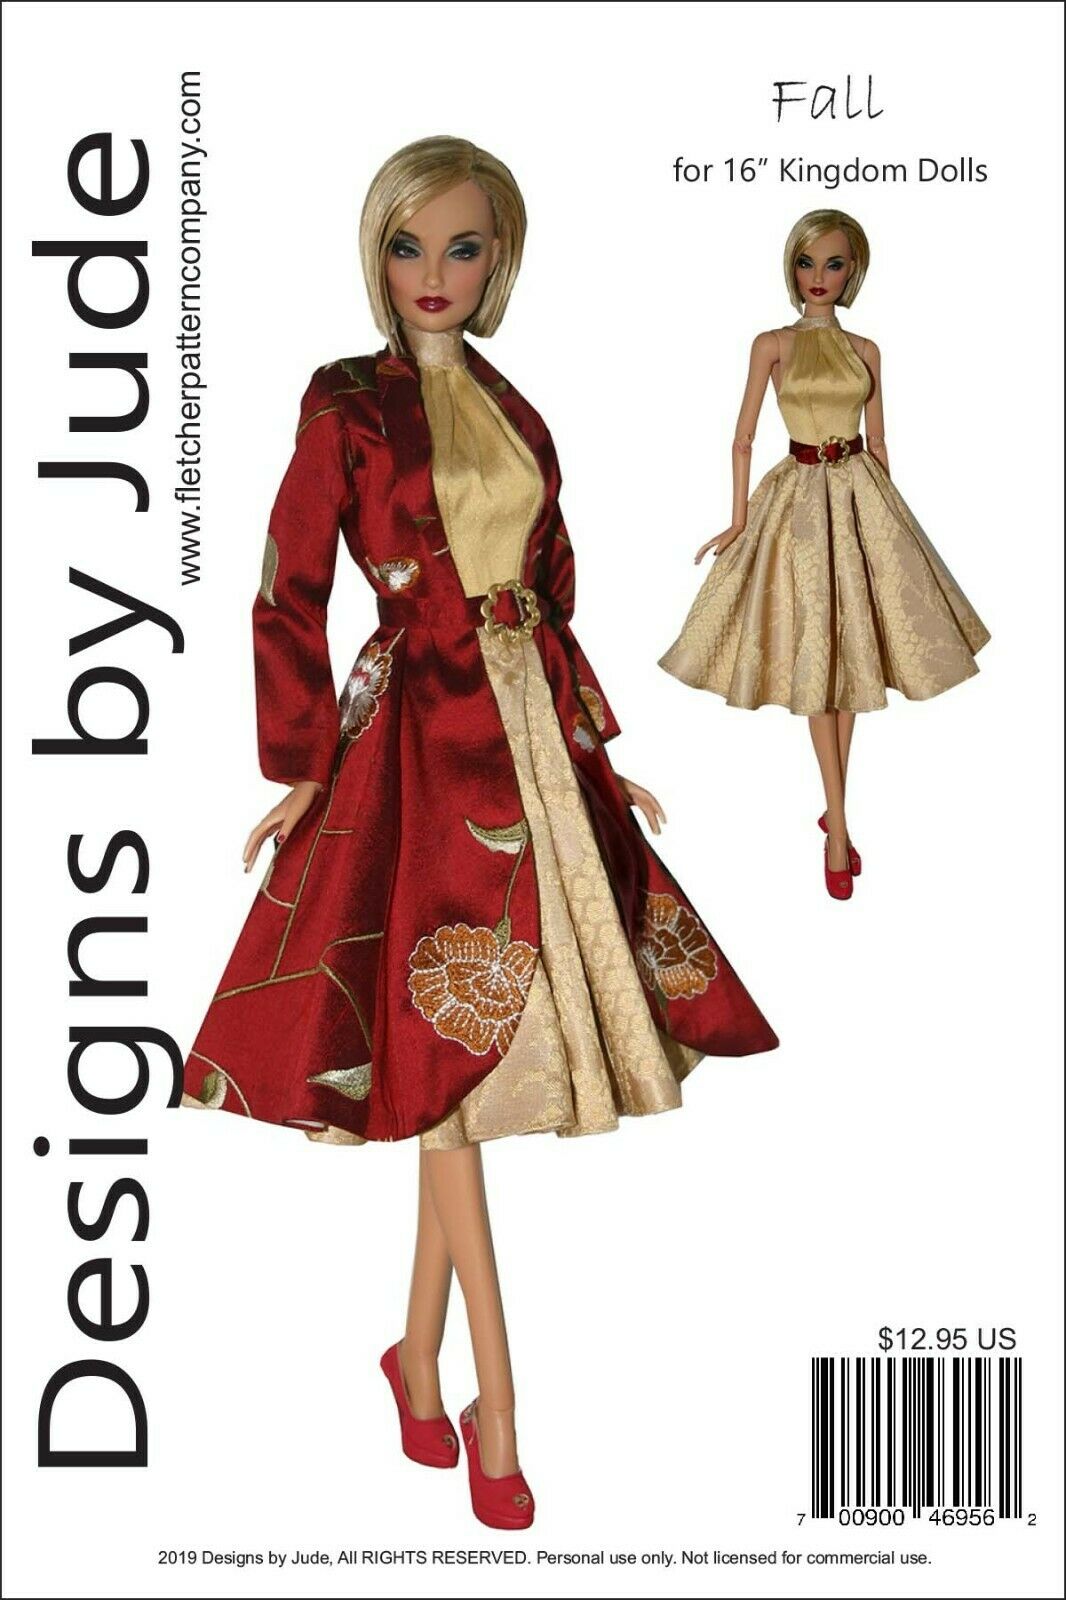 Fall Dress & Coat Doll Clothes Sewing Pattern For 16" Kingdom Dolls